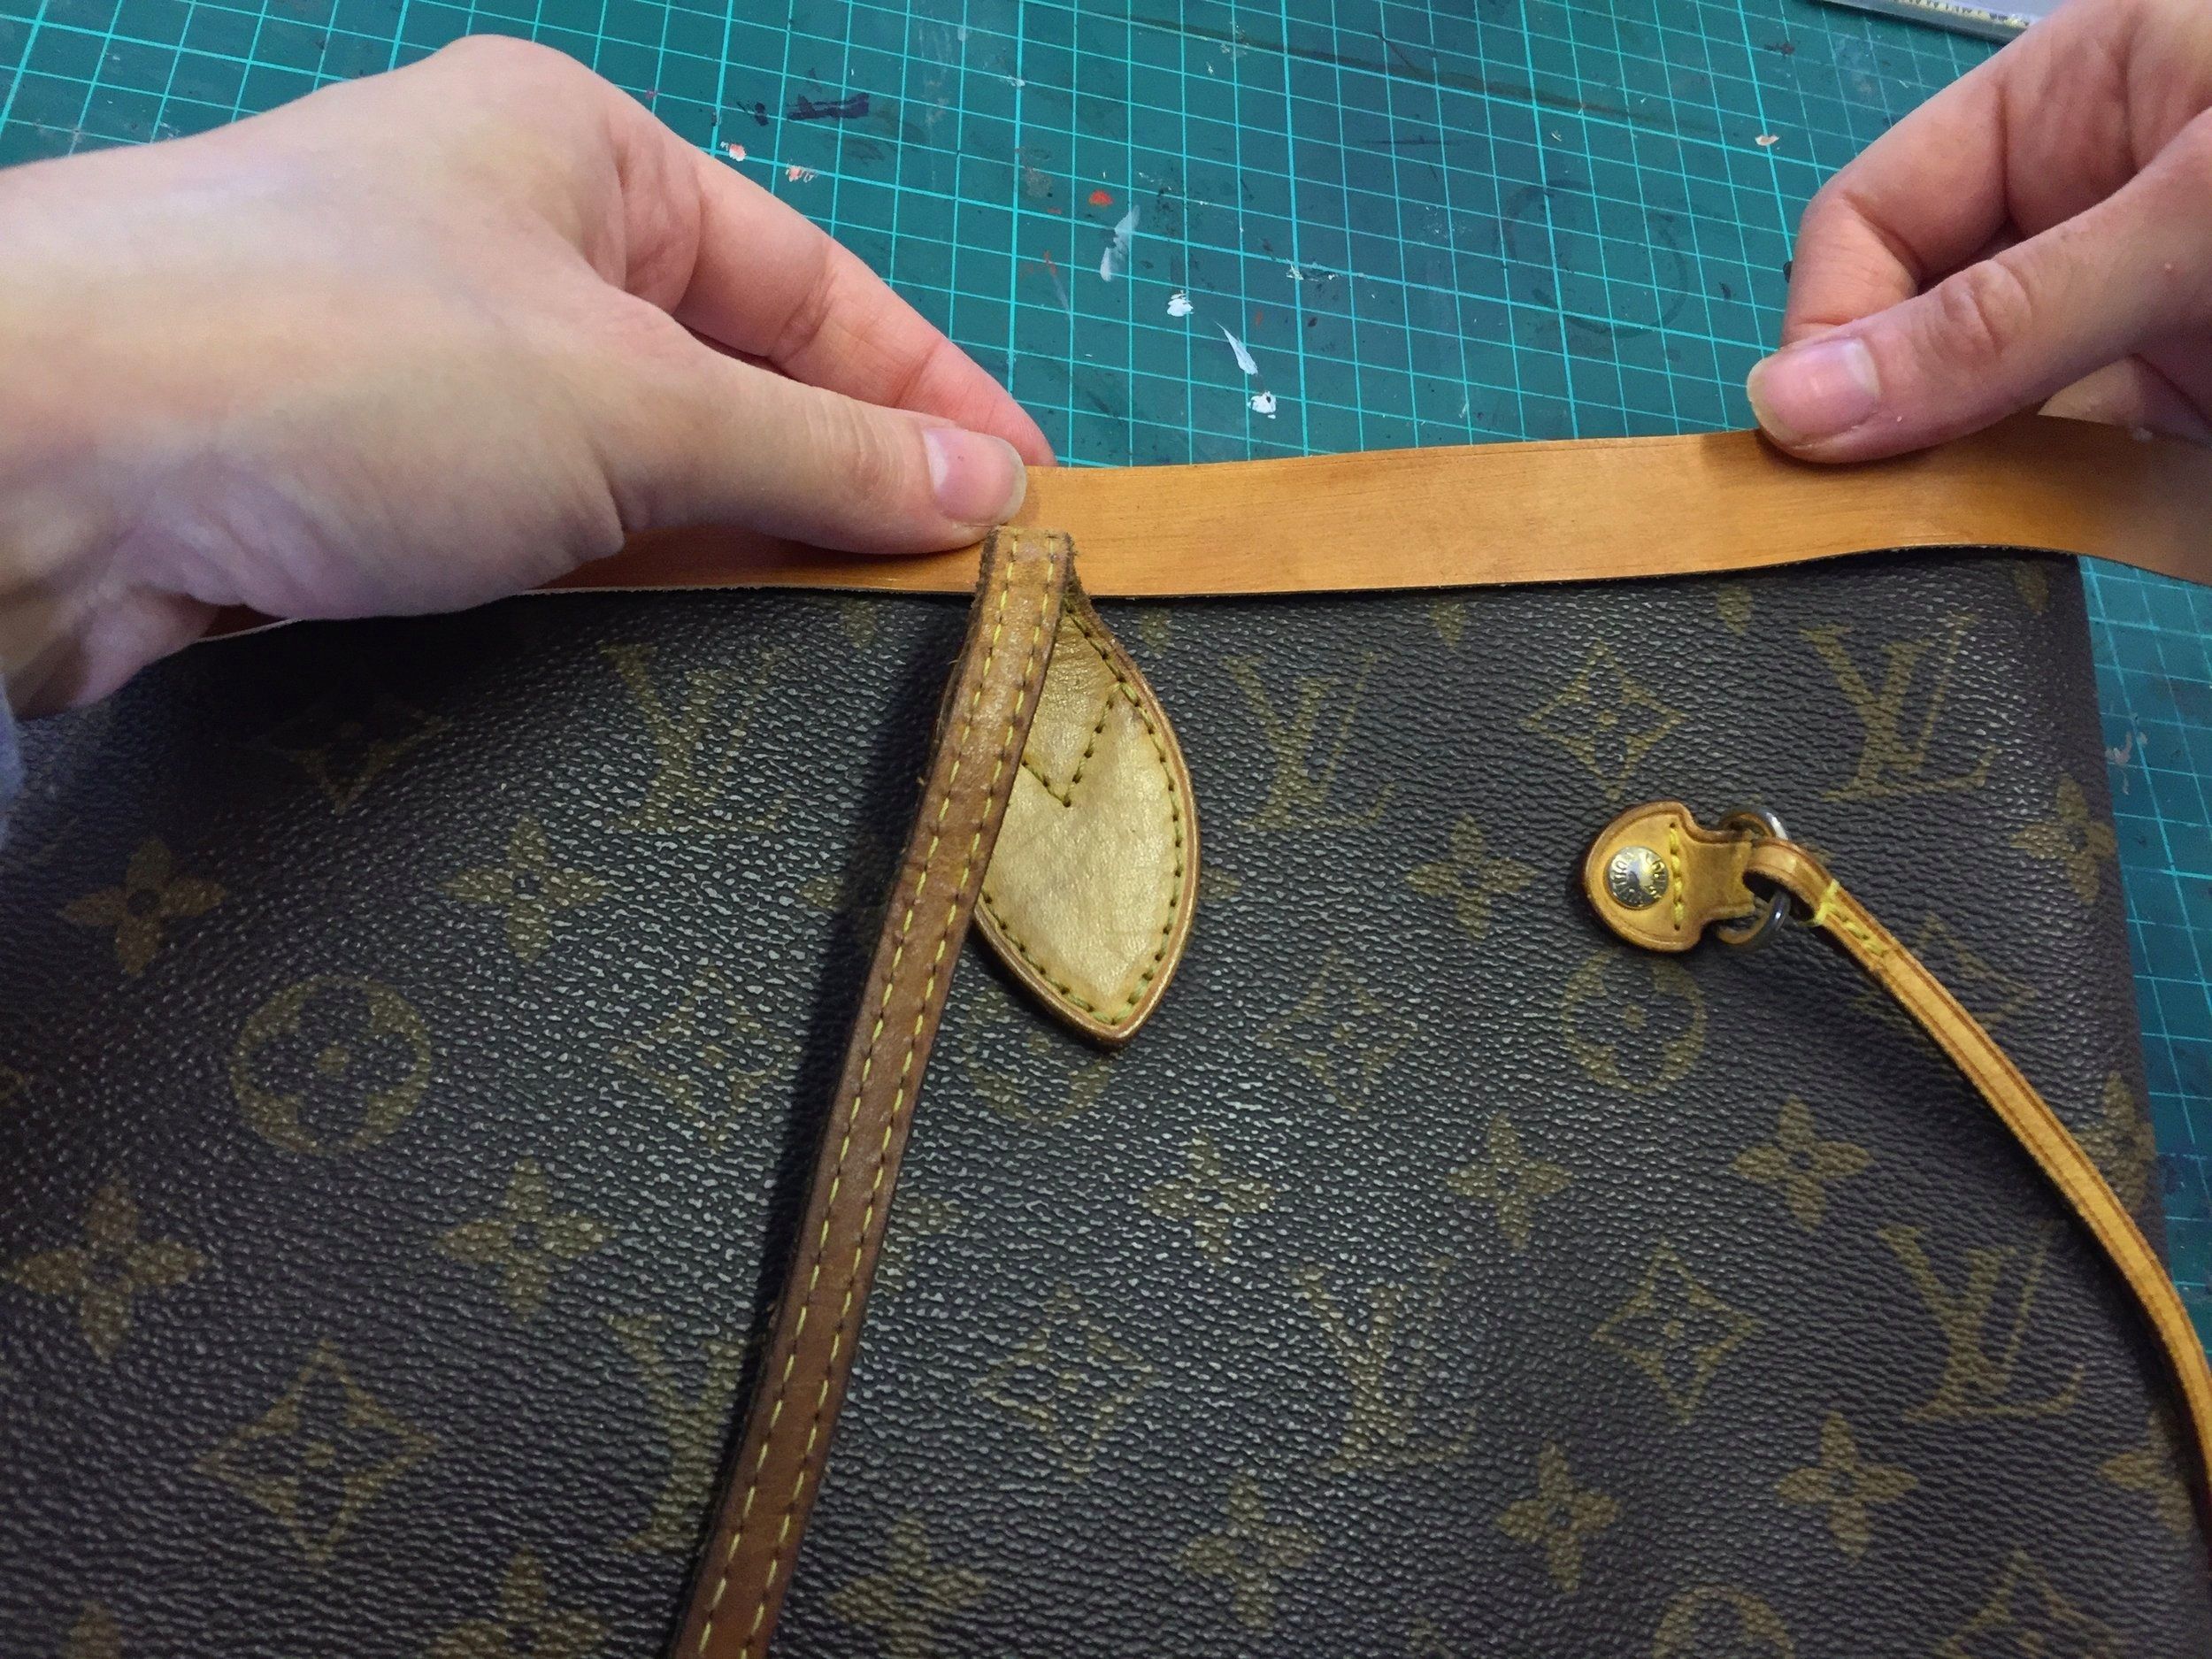 How To Remove Initials Off a Louis Vuitton Leather Bag In 5 Minutes  #removeinitials #lvinitials 